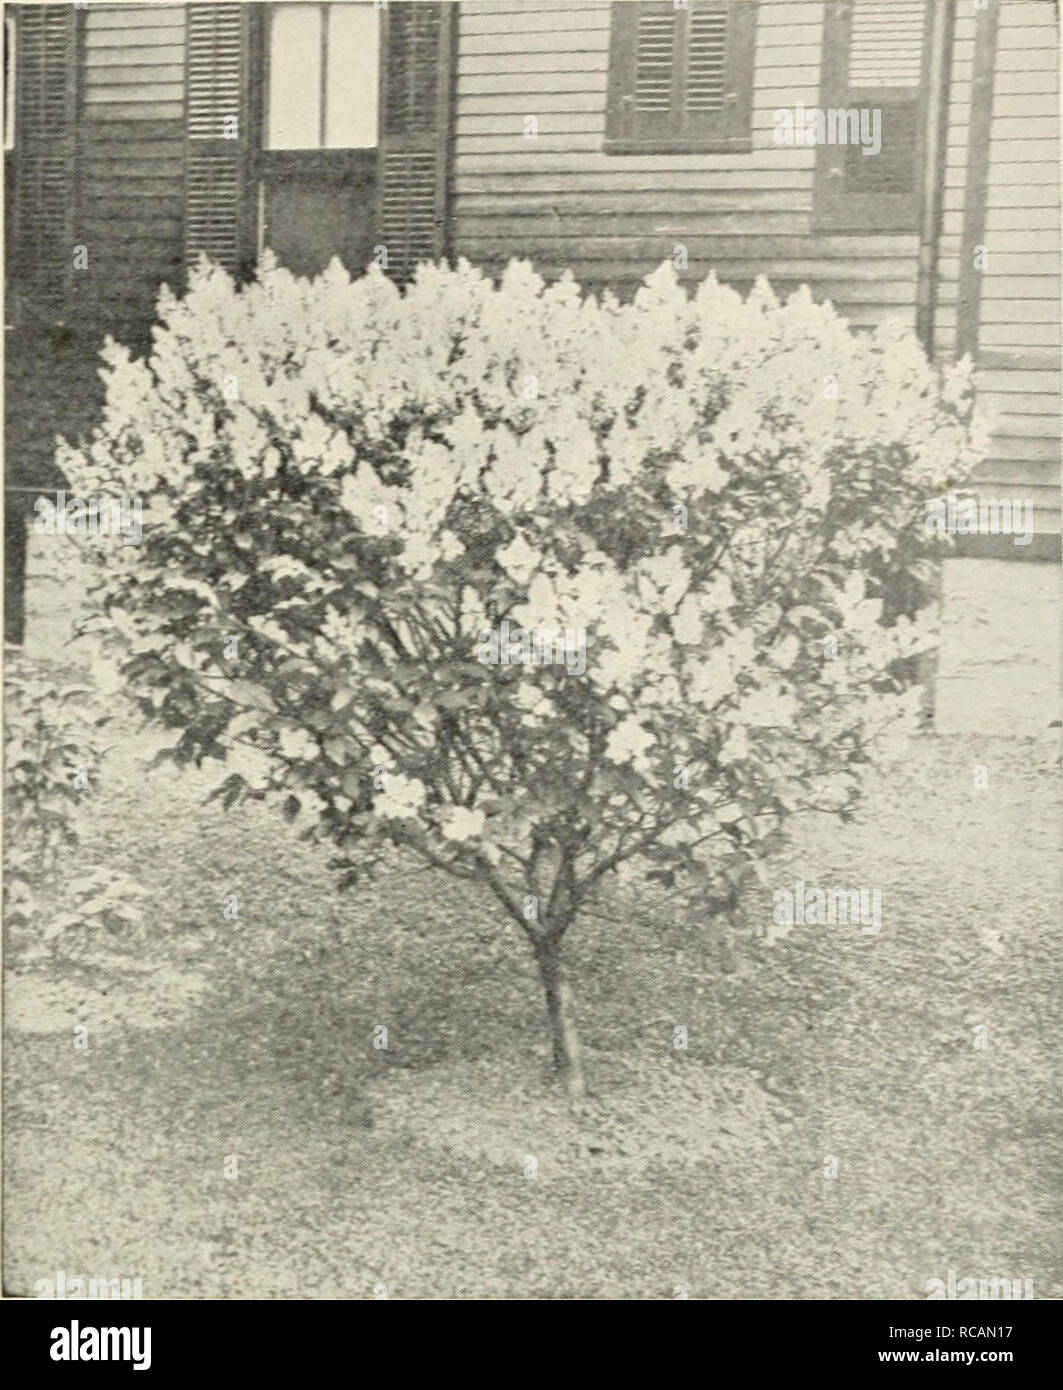 . Ellwanger &amp; Barry : Mount Hope nurseries. GEXERAL CATALOGUE. Spiraea rotundifolia alba. D. Leaves roundish ; flowers white. A dis- tinct variety. 35c. S. salicifolia. Willow-leaved Spir-^a. D. Long, narrow, pointed leaves, and rose-colored flowers in June and July. 35c. S. sorbifolia. Sorb-leaved Spir.ea. D. A vigorous species, with leaves like those of the Mountain Ash, and long, elegant spikes of white flowers in July. 35c. S. Thunbergii. Thuxberg's Spir^^a. D. Of dwarf habit and rounded, graceful form ; branches slender and somewhat drooping ; foliage narrow and yellowish green ; flow Stock Photo